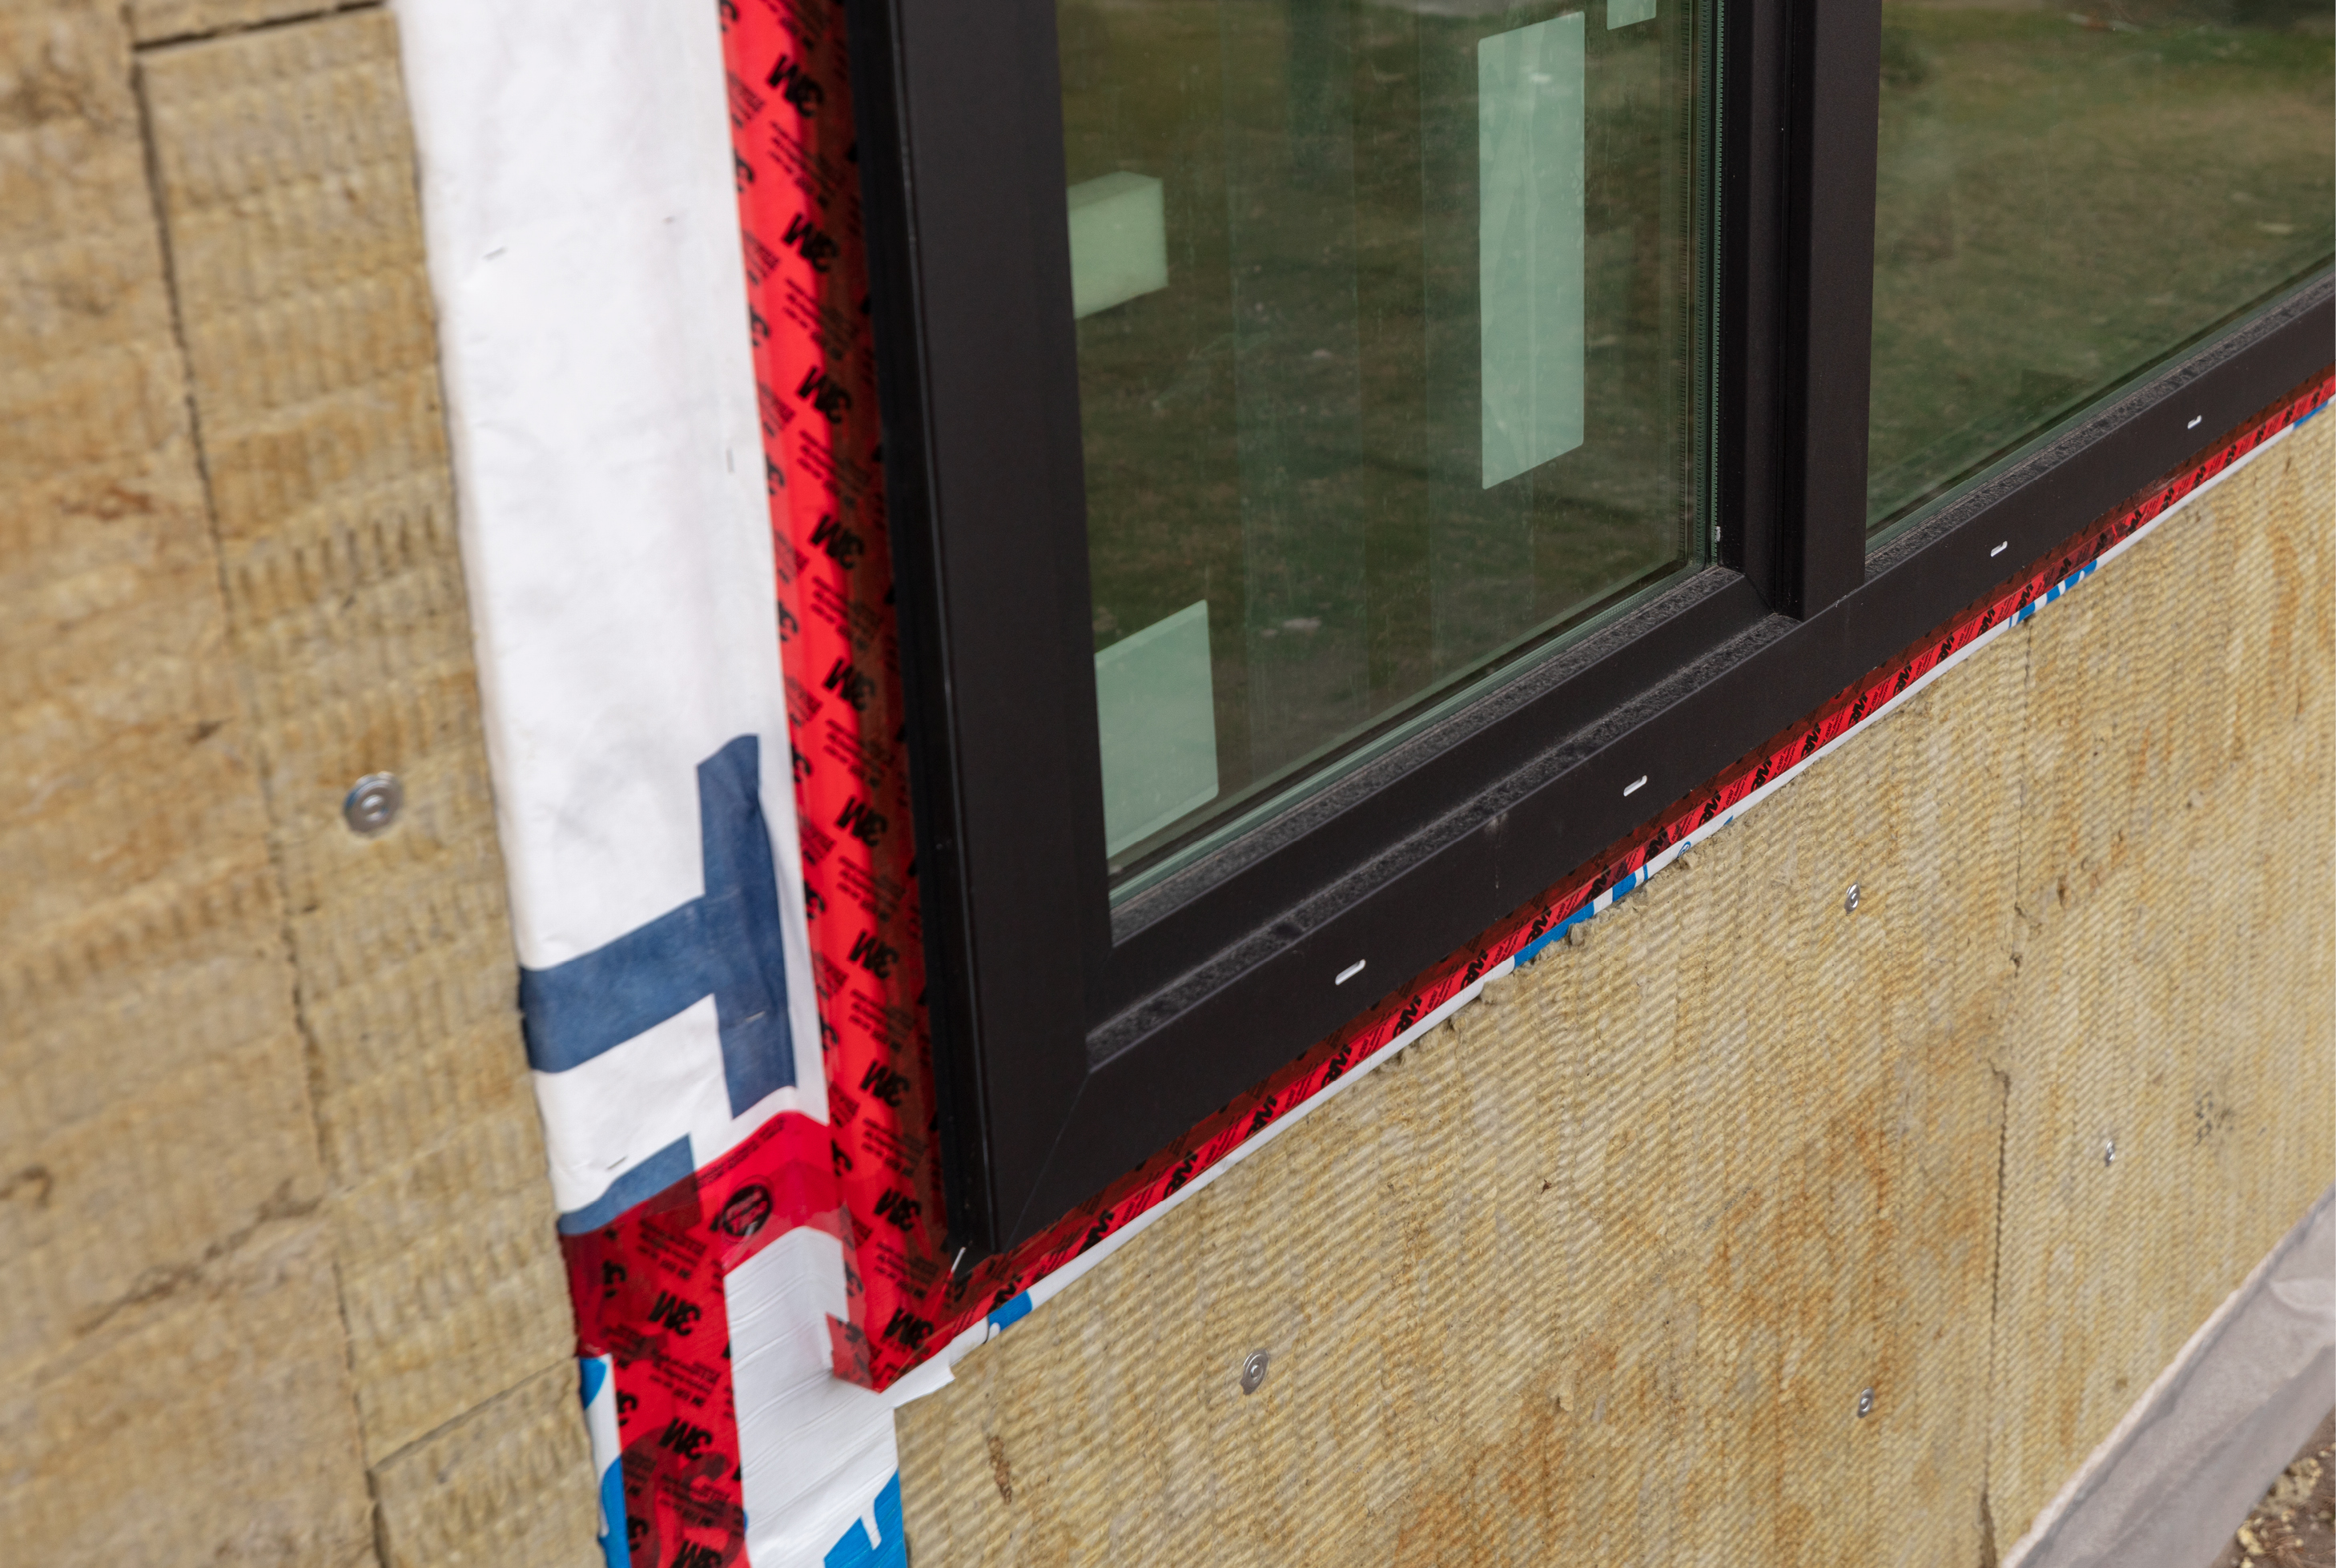 Insulation cladding on the exterior and high-efficiency windows are two components of a good building envelope.